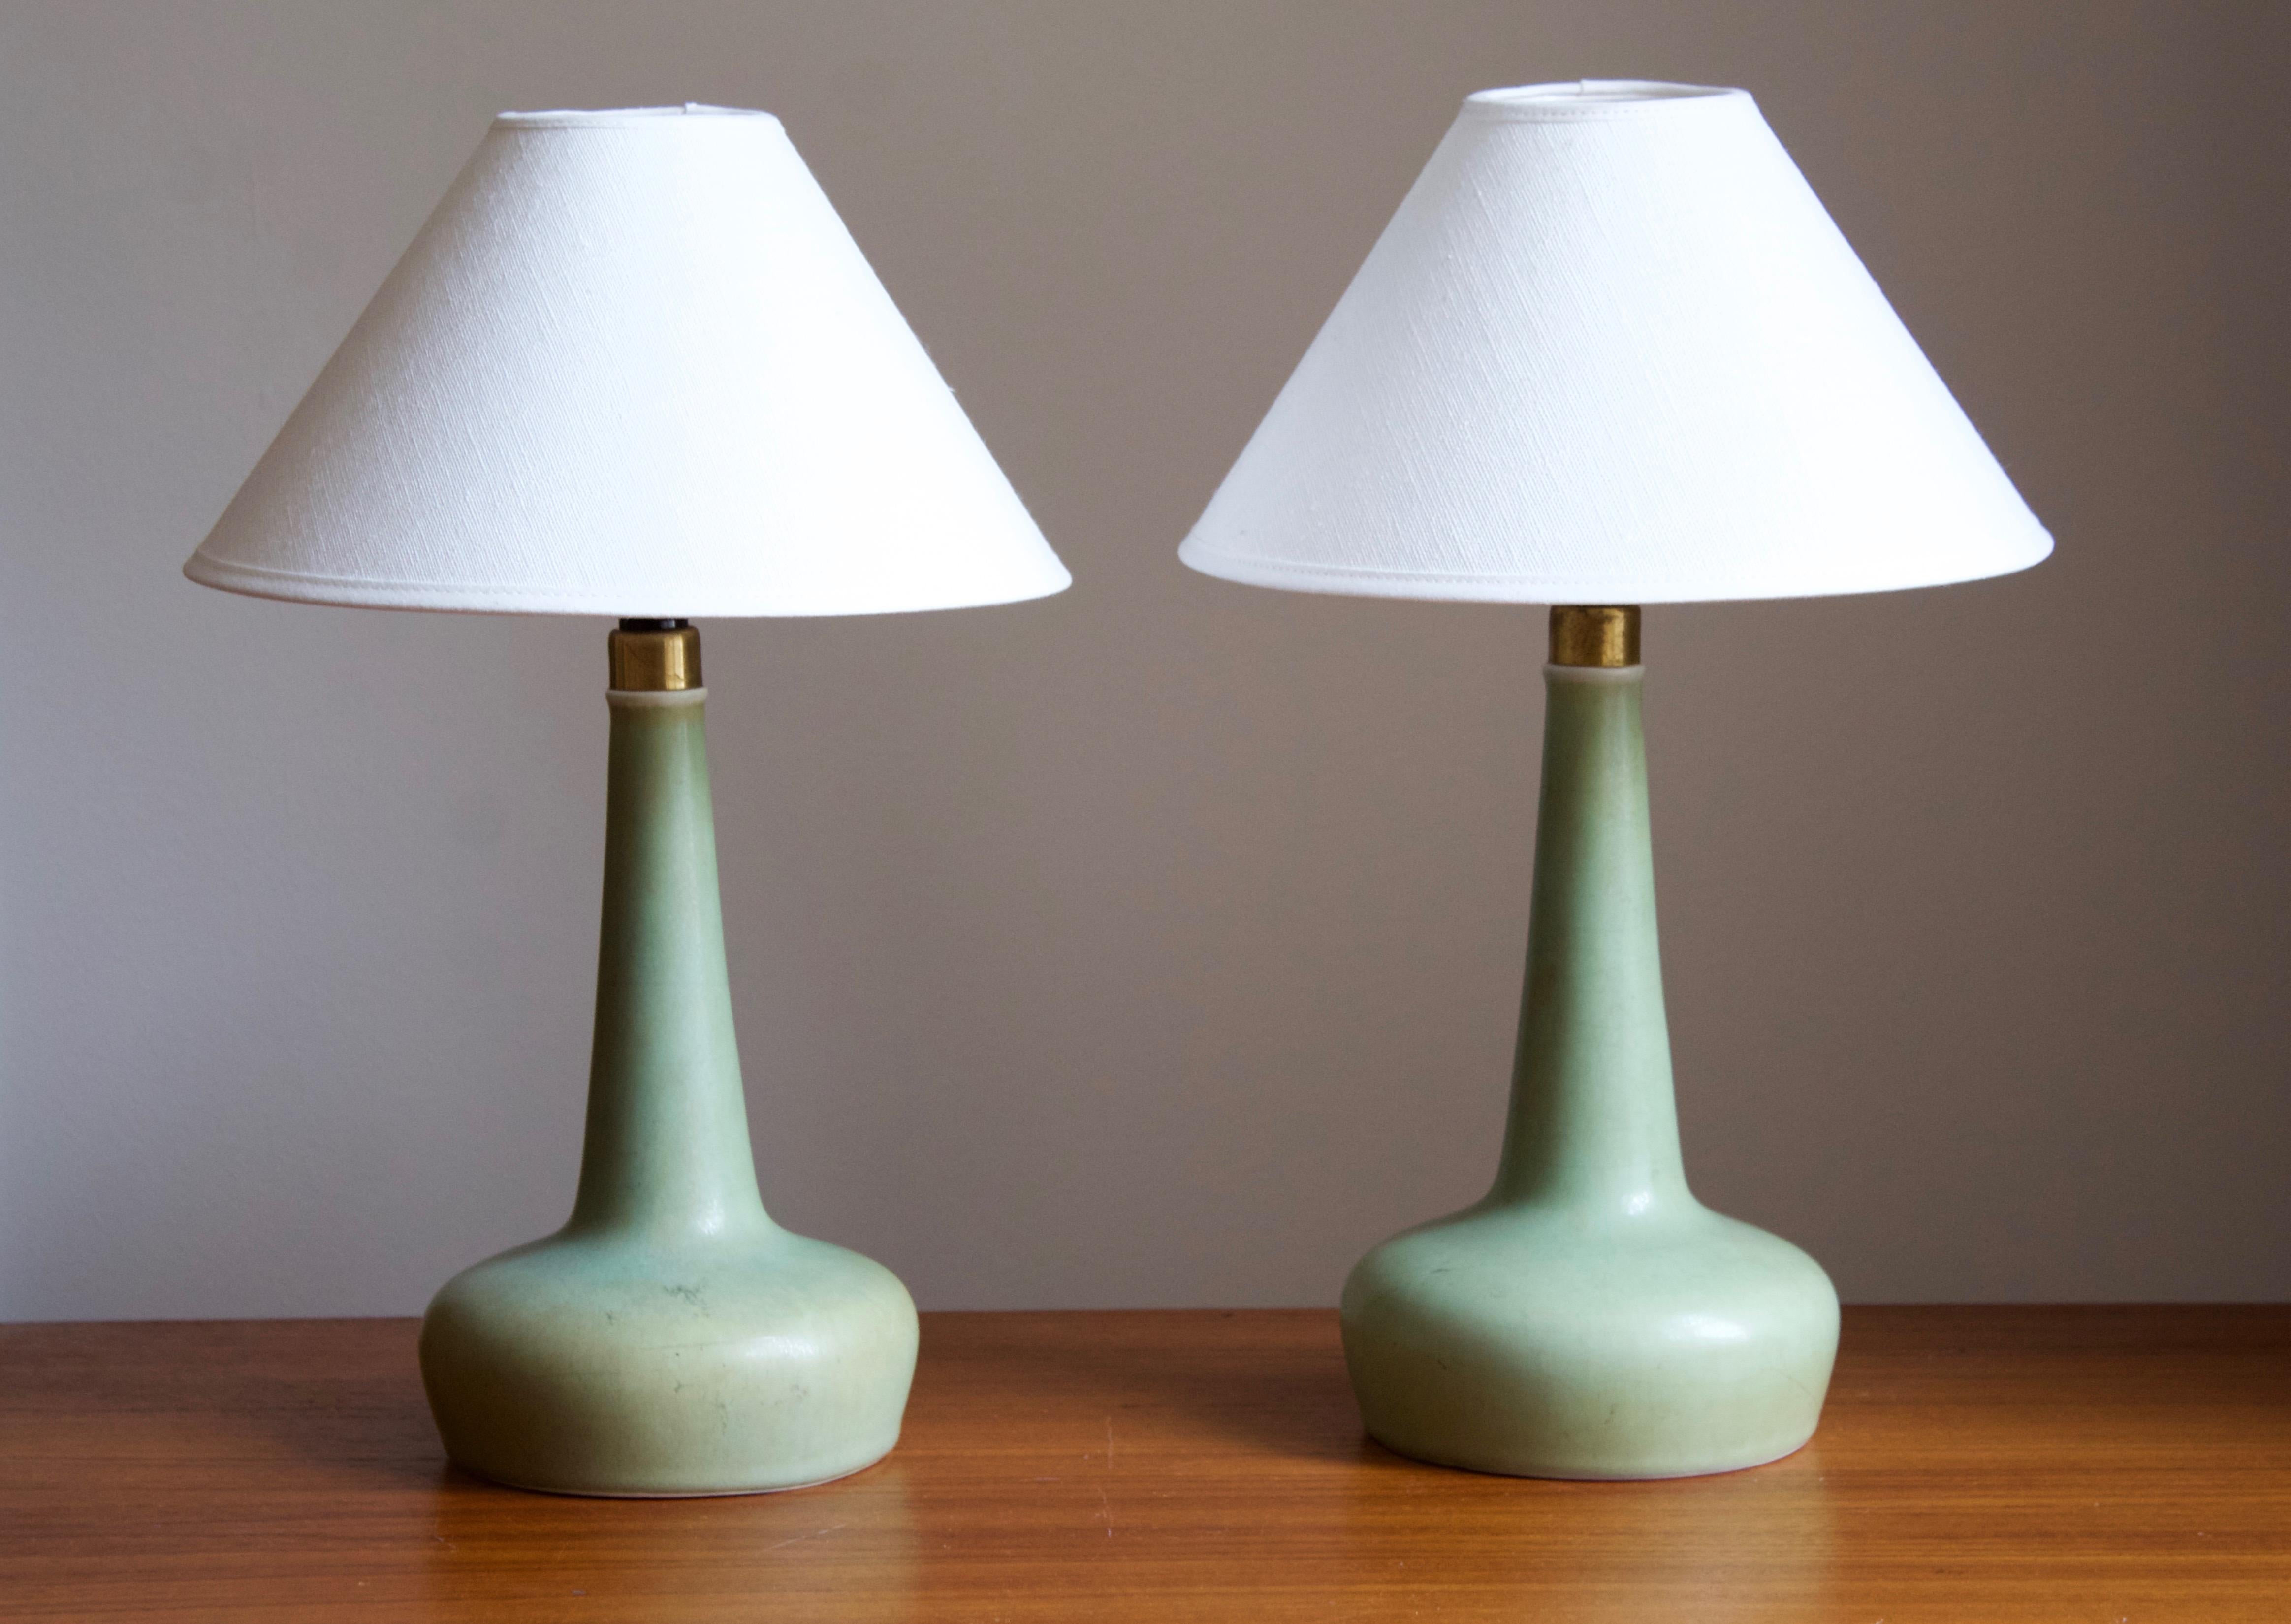 A pair of table / desk lamp designed by husband and wife Per & Annelise Linneman-Schmidt. Handcast in stoneware brass details. Produced in their own Studio, named Palshus, in Sengeløse, Denmark. Signed.

Sold without lampshades. Stated dimensions